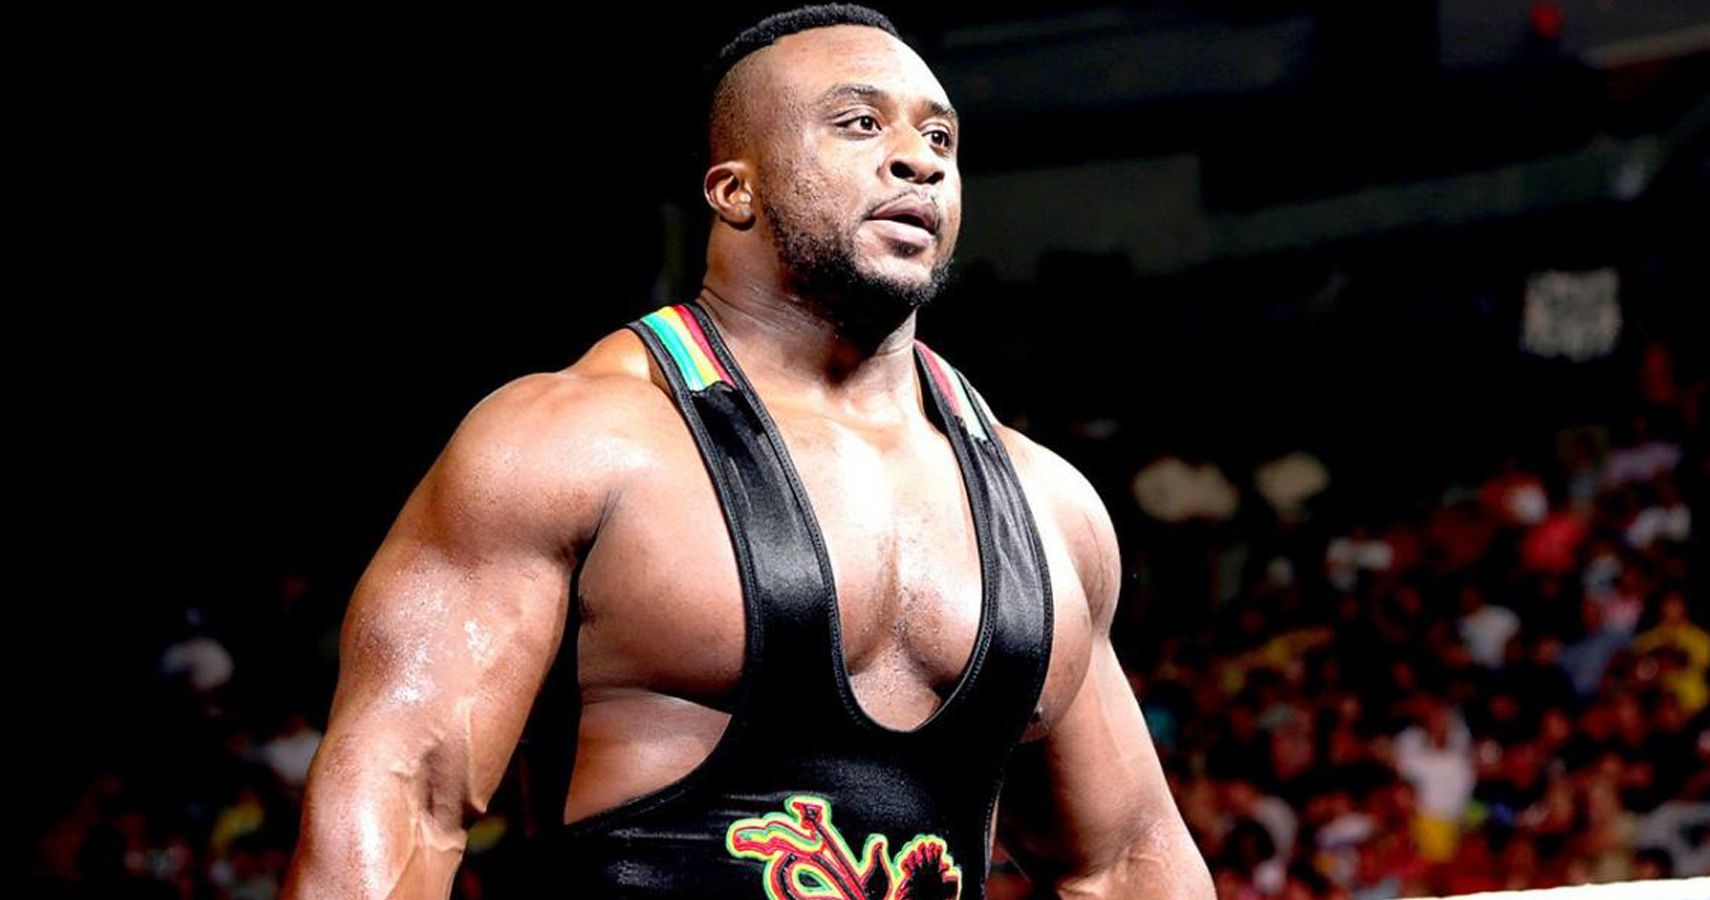 Big E Reveals The Star Who Convinced WWE To Give Him His Singles Push